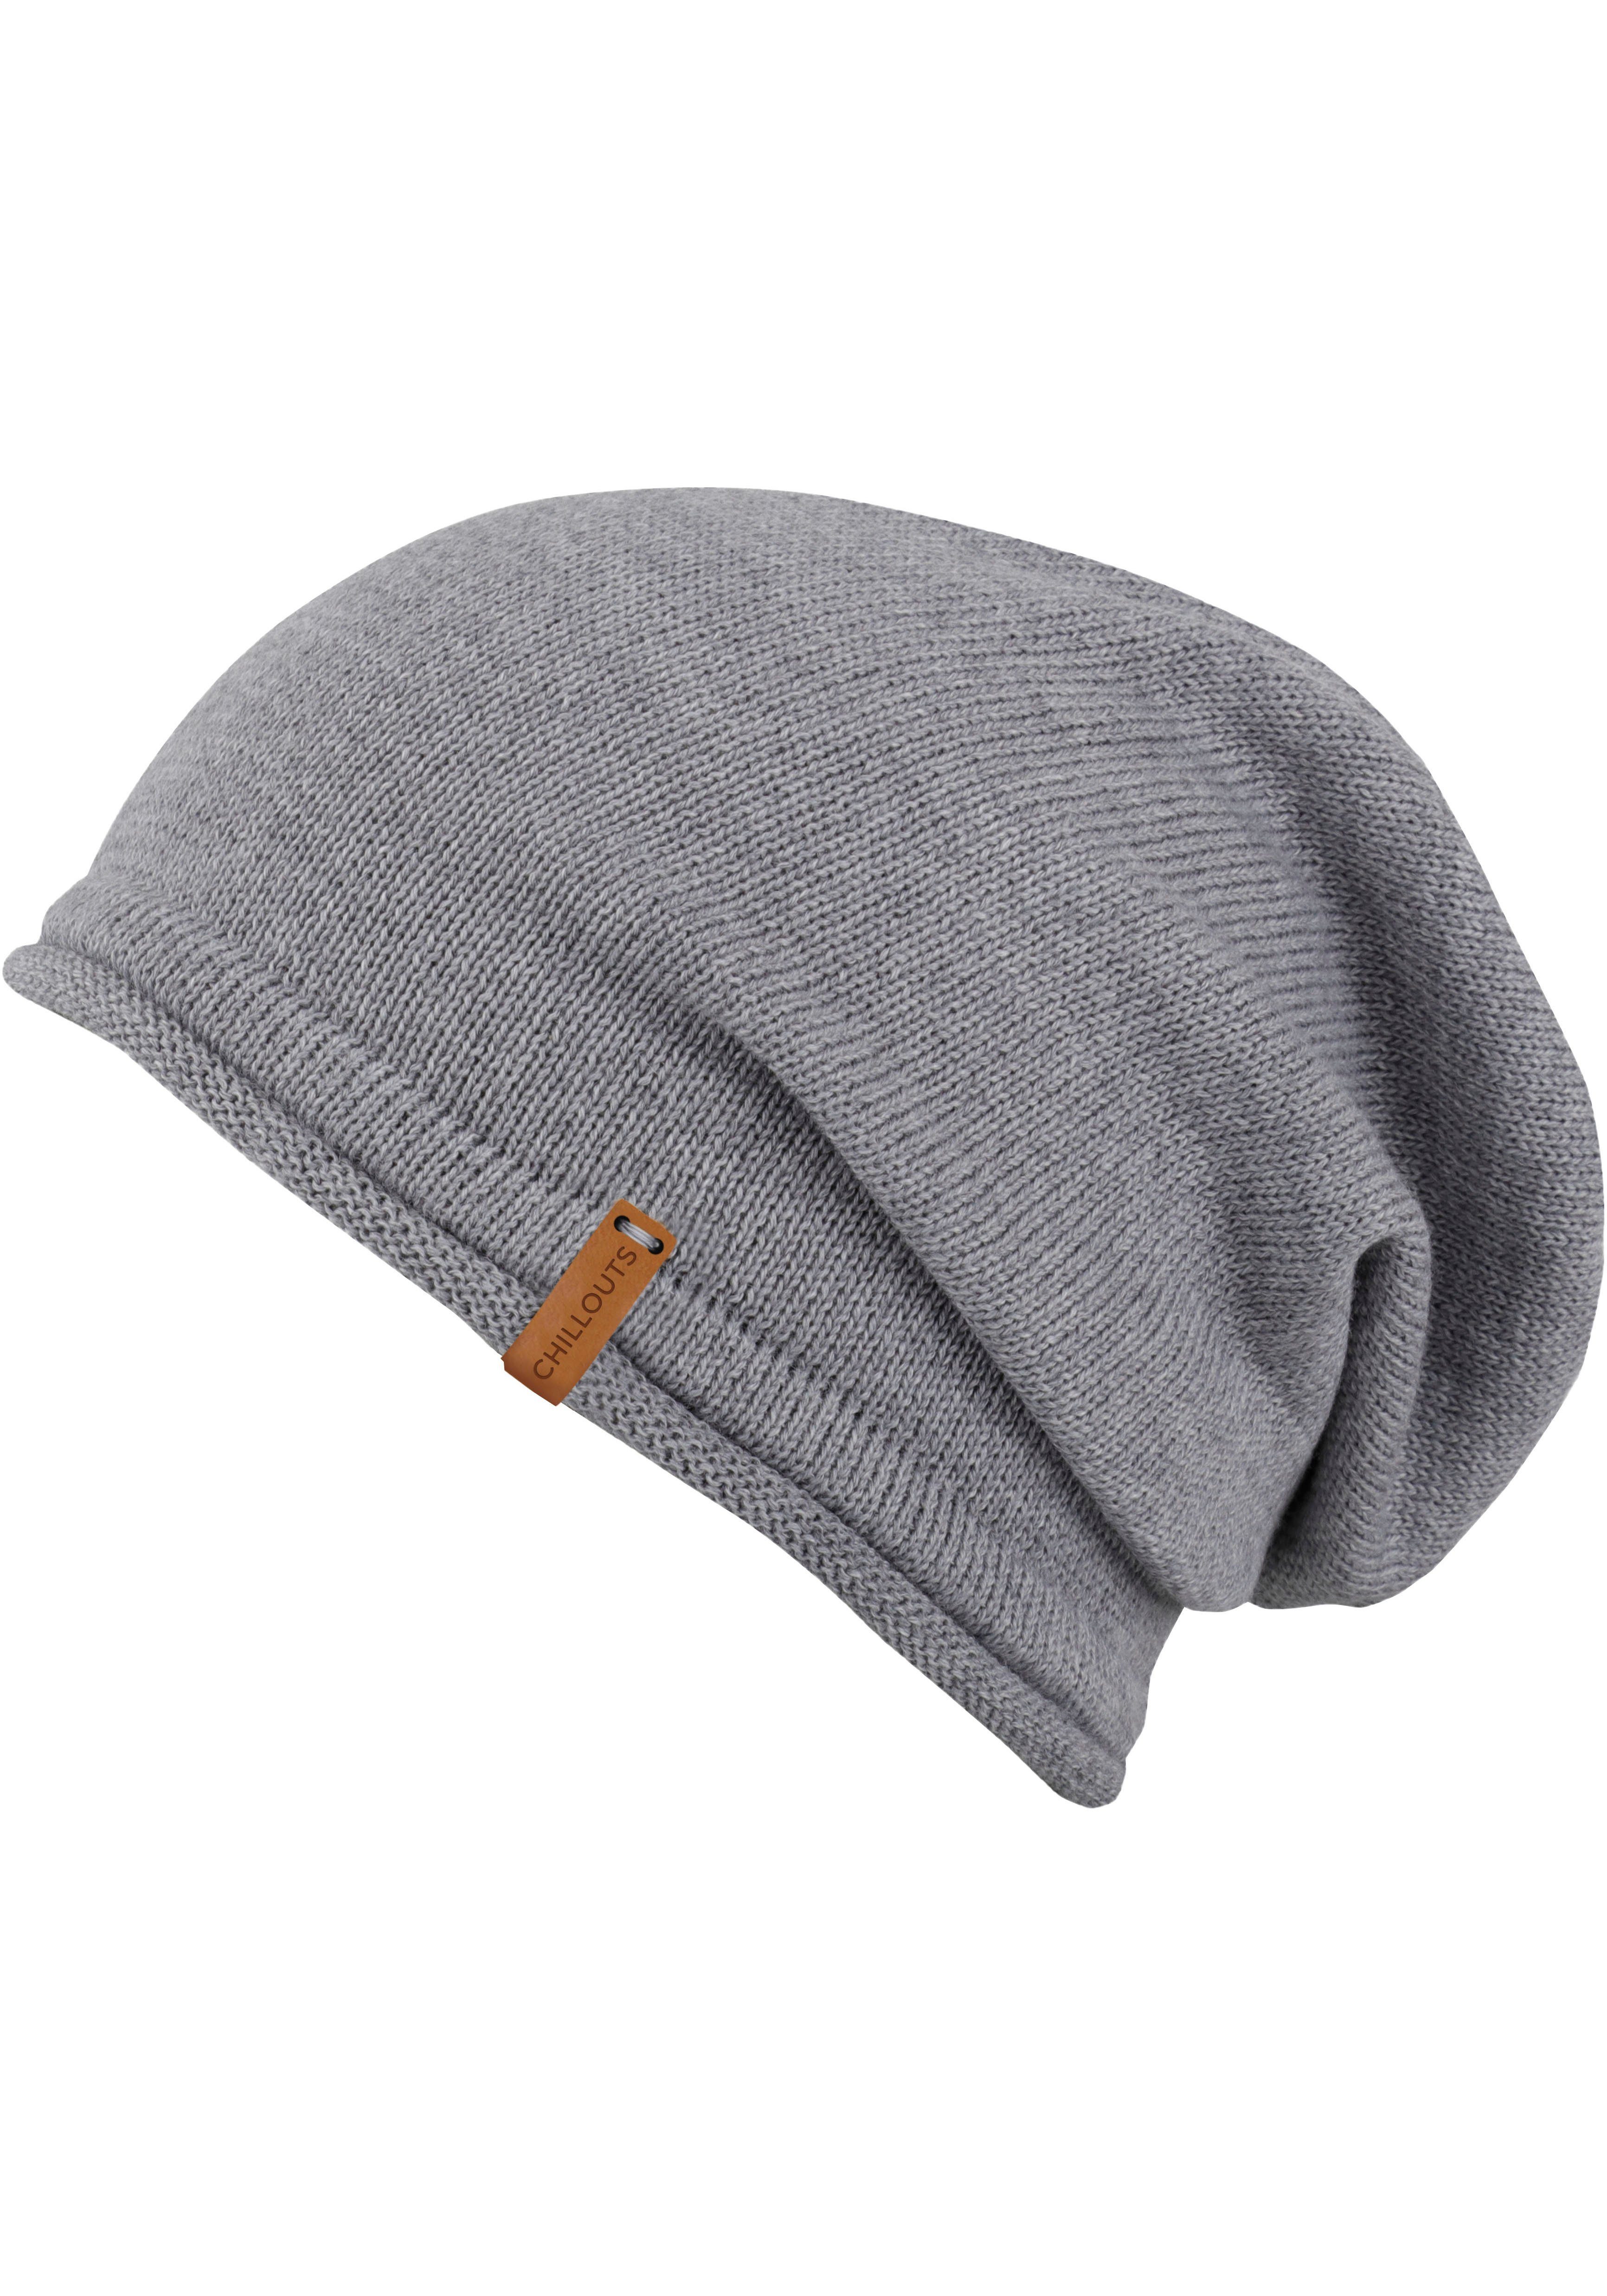 chillouts Beanies online kaufen | OTTO